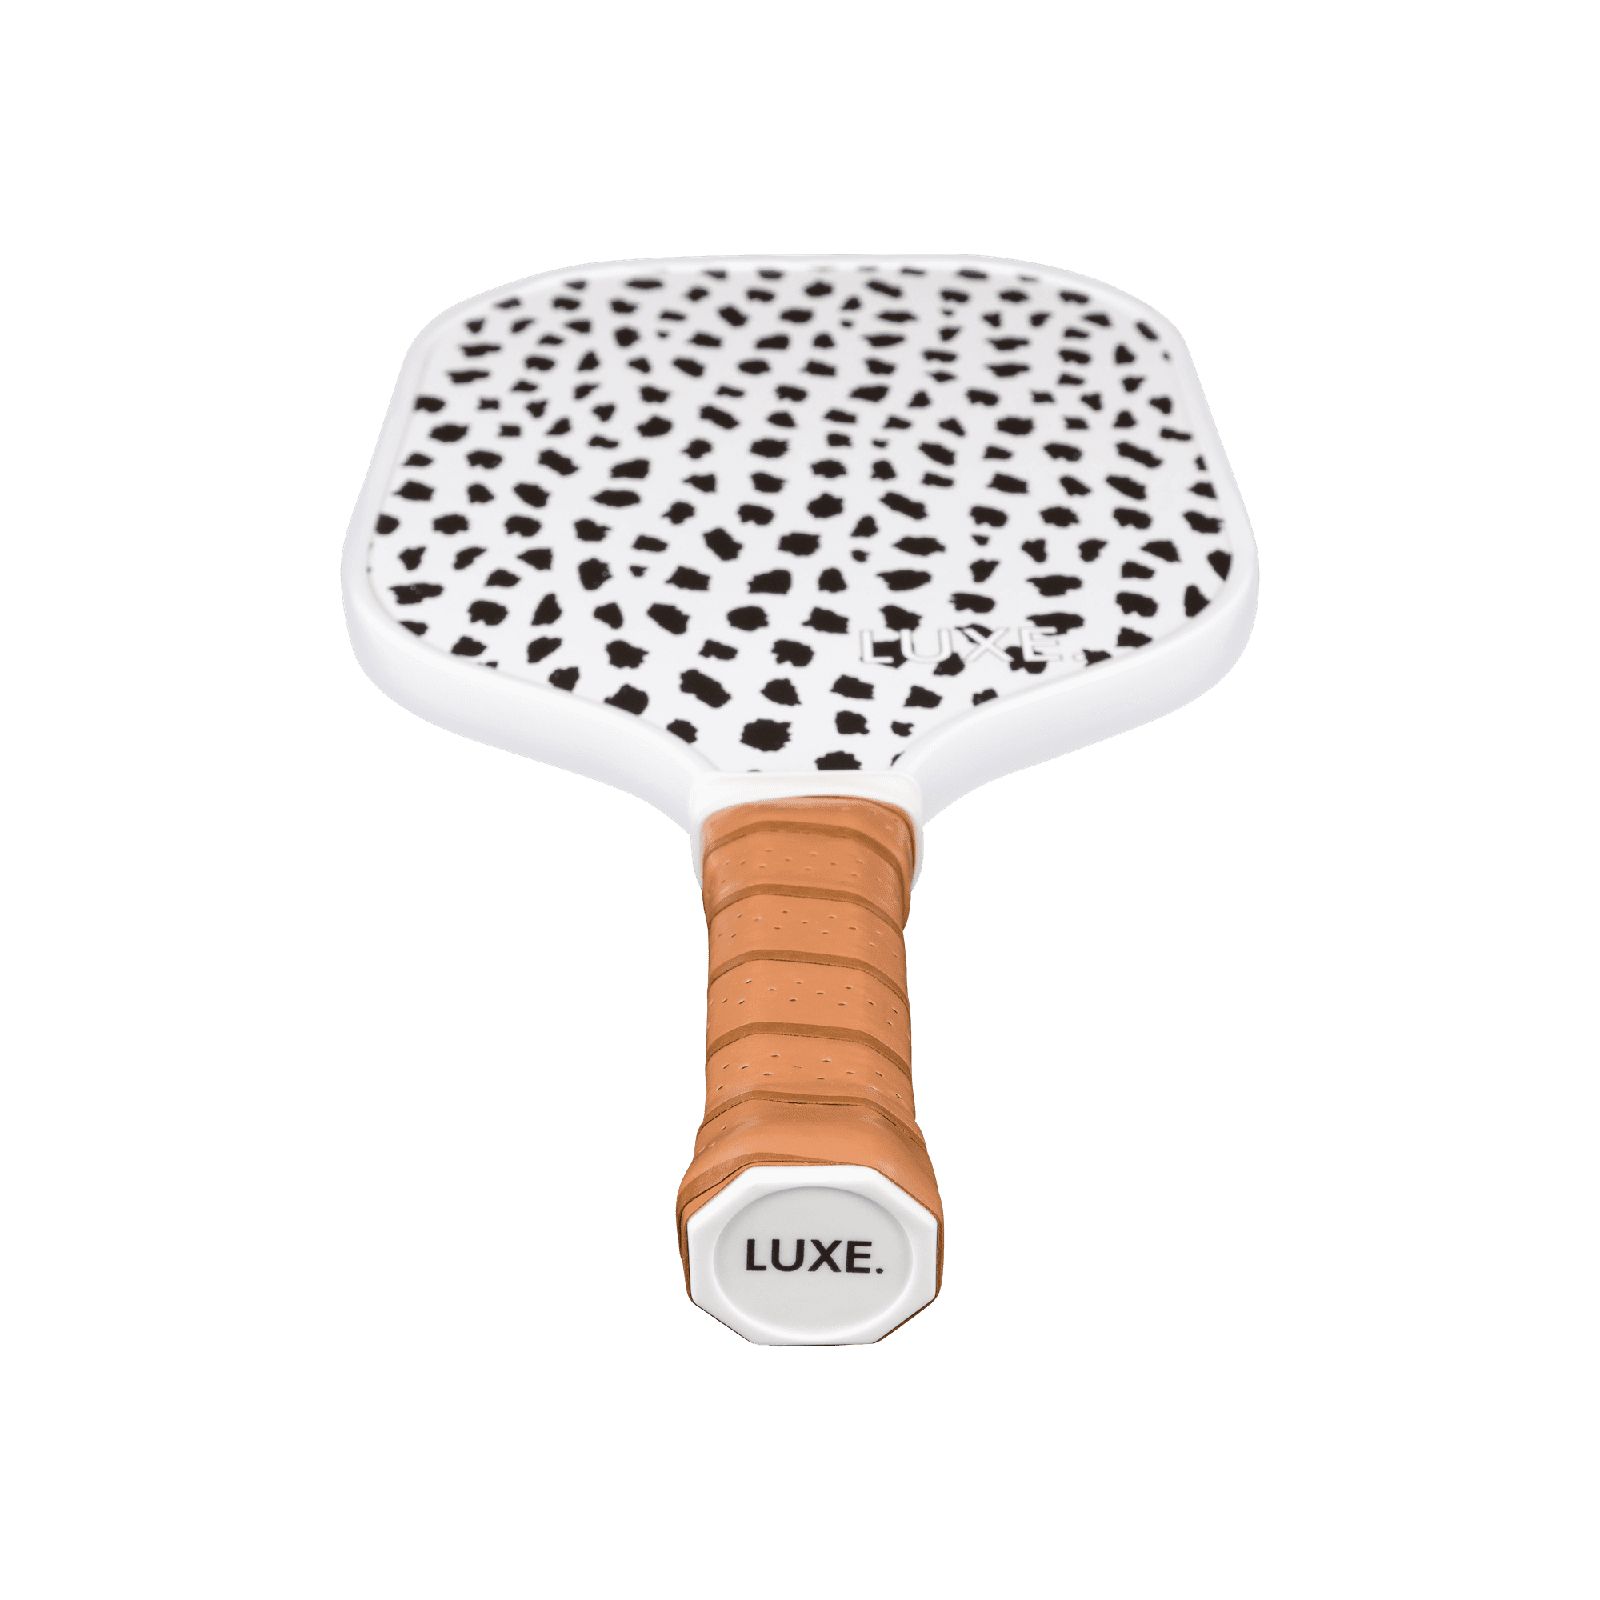 Cheetah LUXE Pickleball Paddle. Cute and aesthetic pickleball paddles